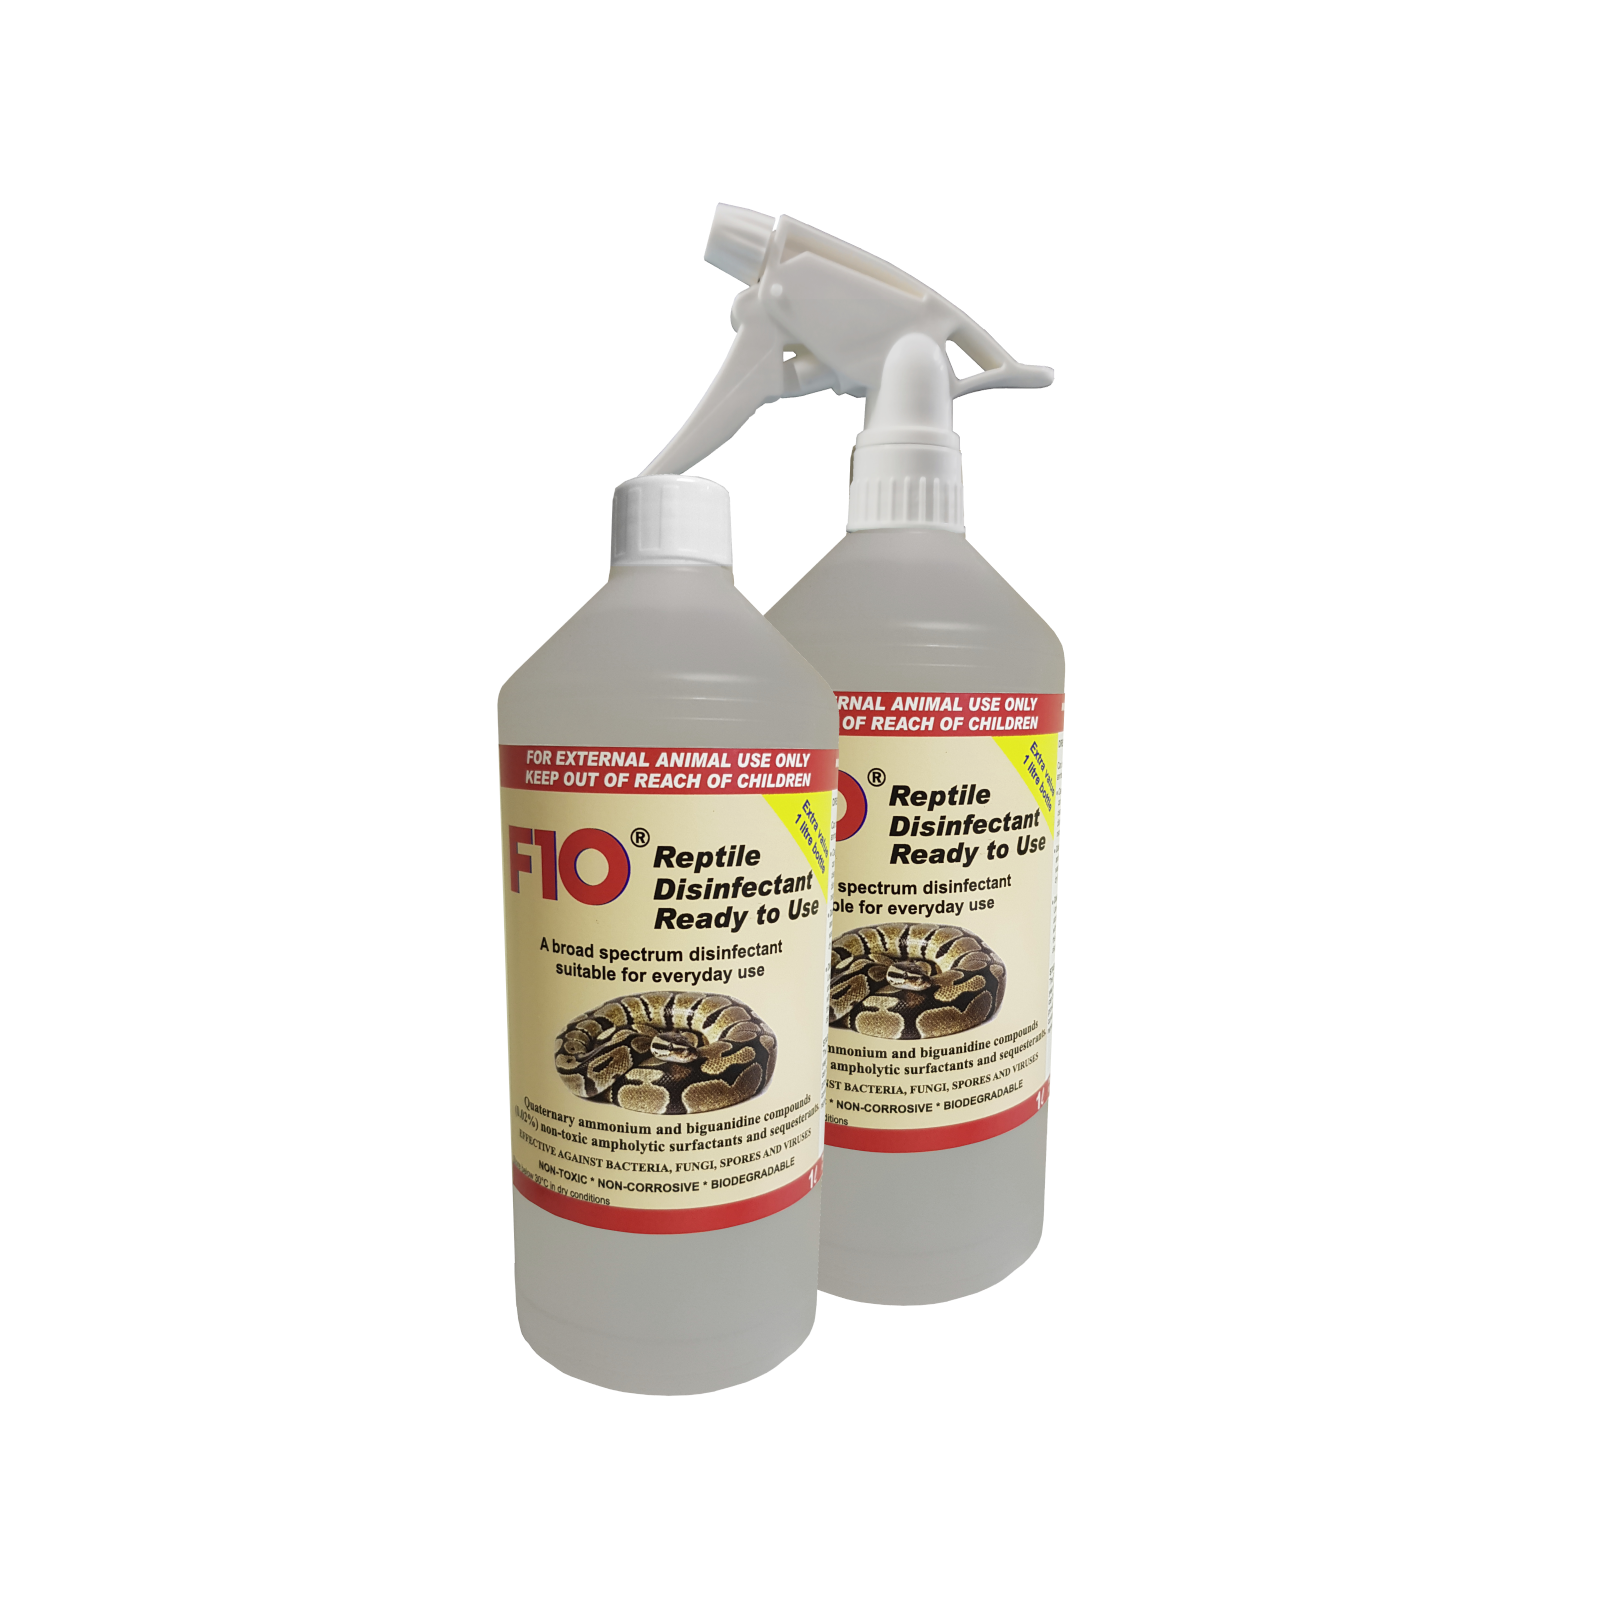 Two 1 litre bottles of F10 Reptile Disinfectant Ready to Use, one with a trigger spray